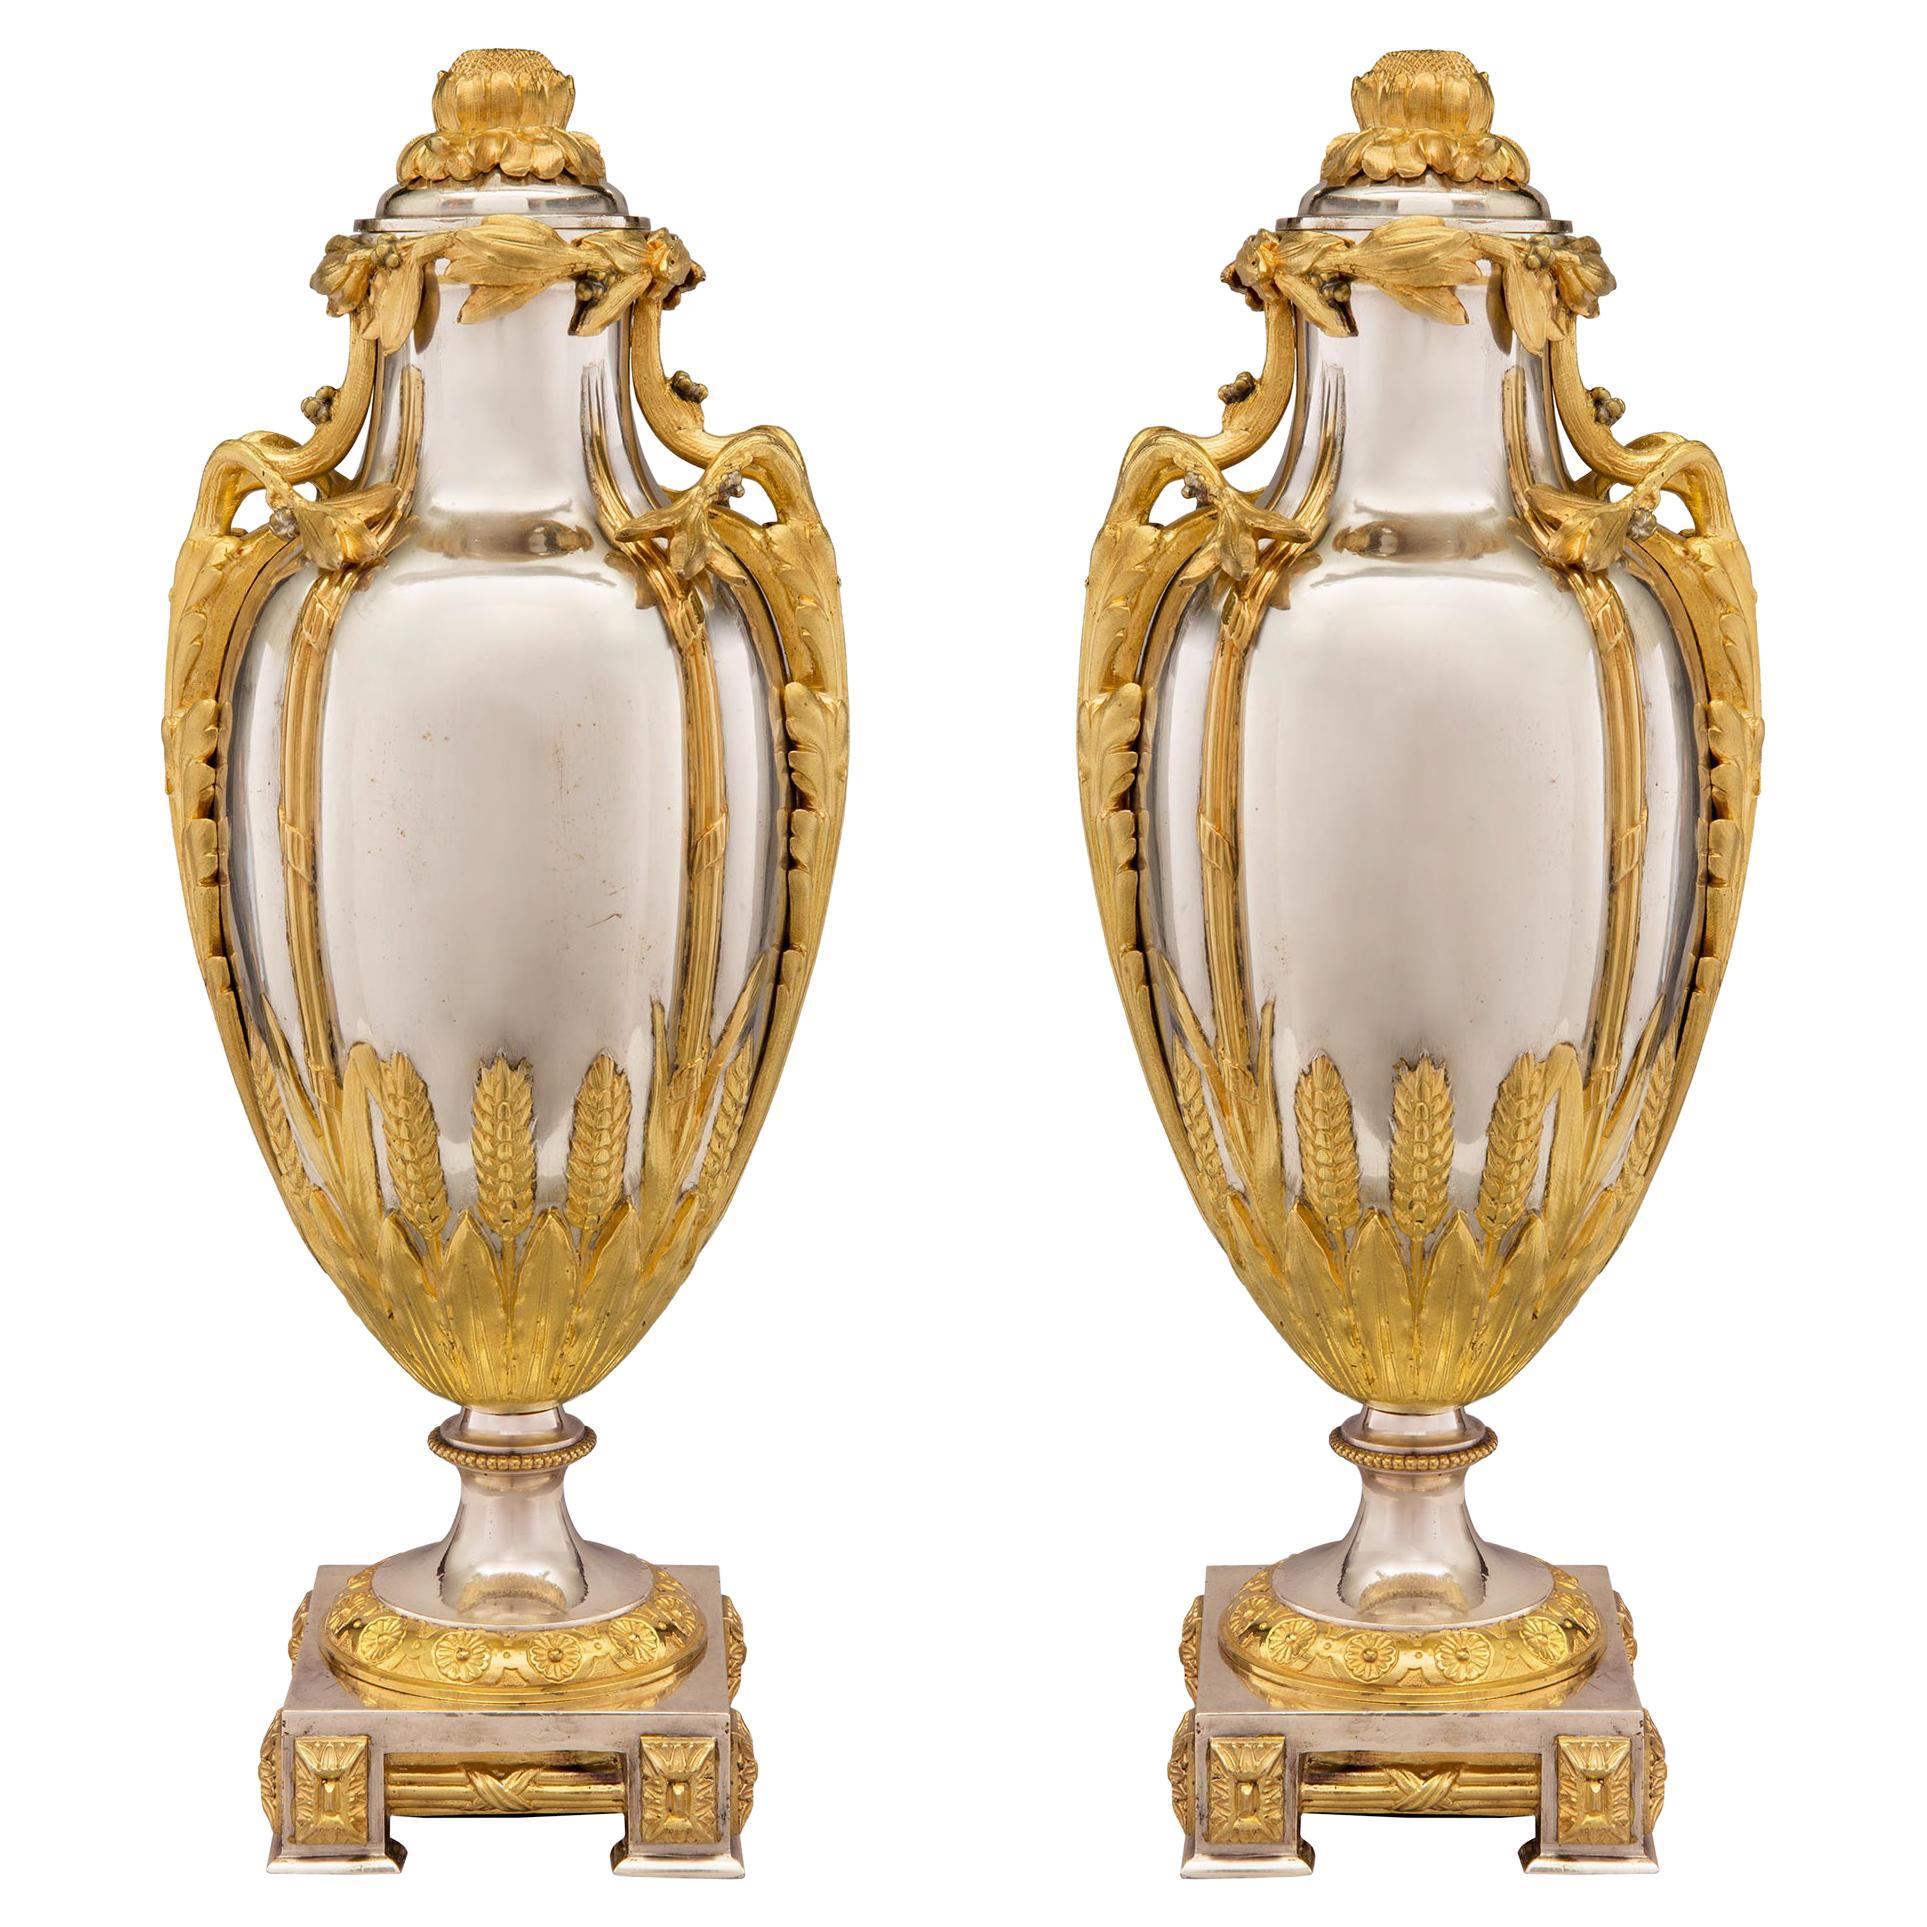 Pair of French 19th Century Louis XVI Style Silvered Bronze and Ormolu Urns For Sale